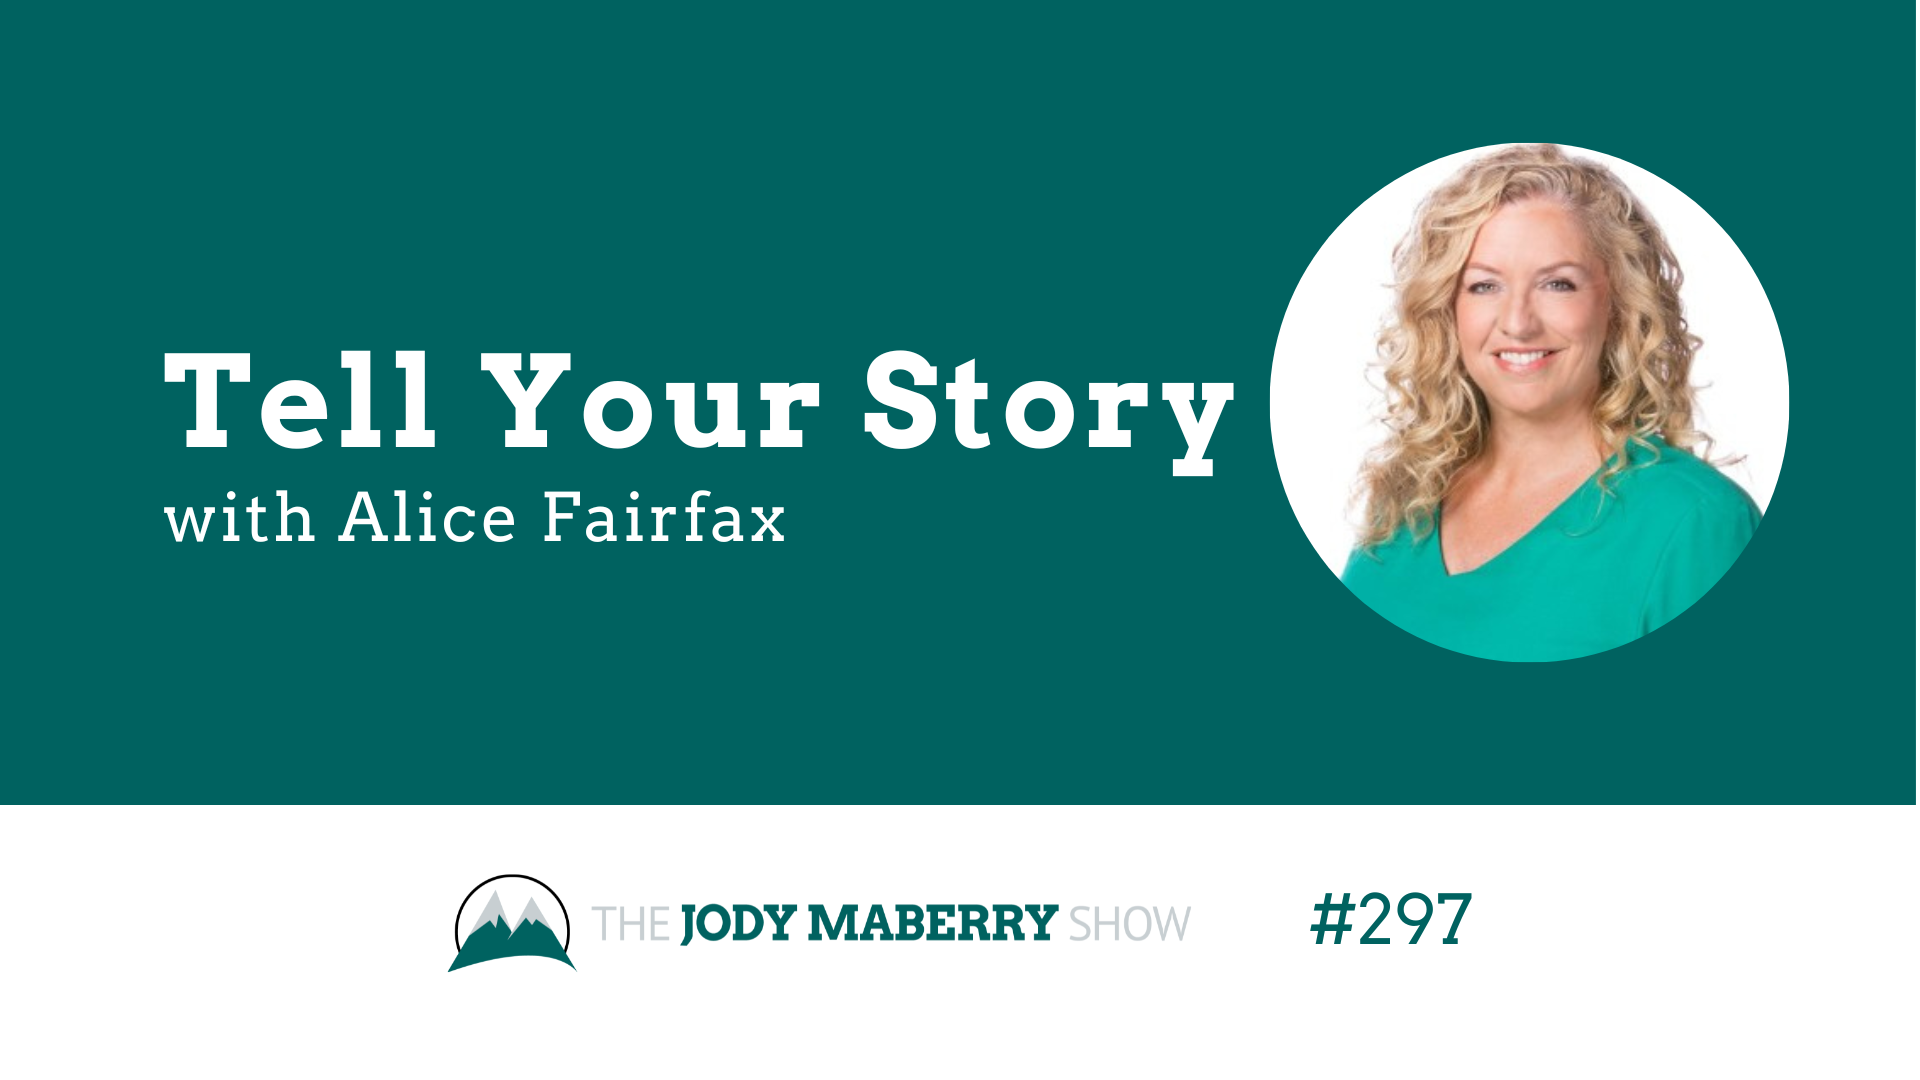 Jody Maberry Show Episode 297 Tell Your Story Alice Fairfax